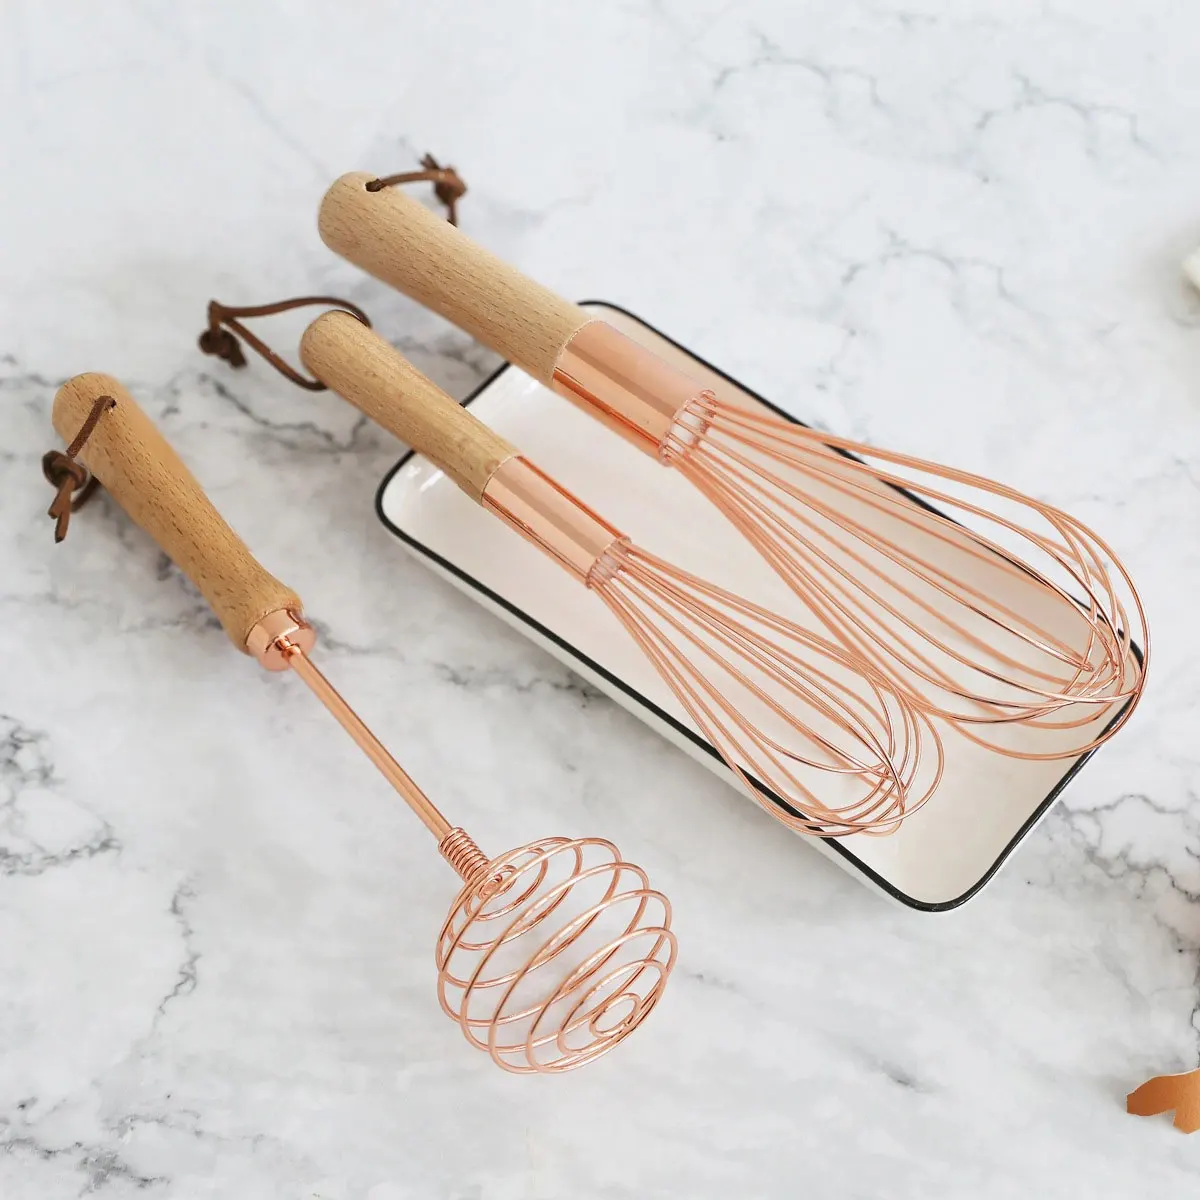 

Wholesale High Quality Egg Beater Wood Mini Beech Wood Handle Egg Mixer Kitchen Silicone Manual Egg Whisk For Baking, Rose gold